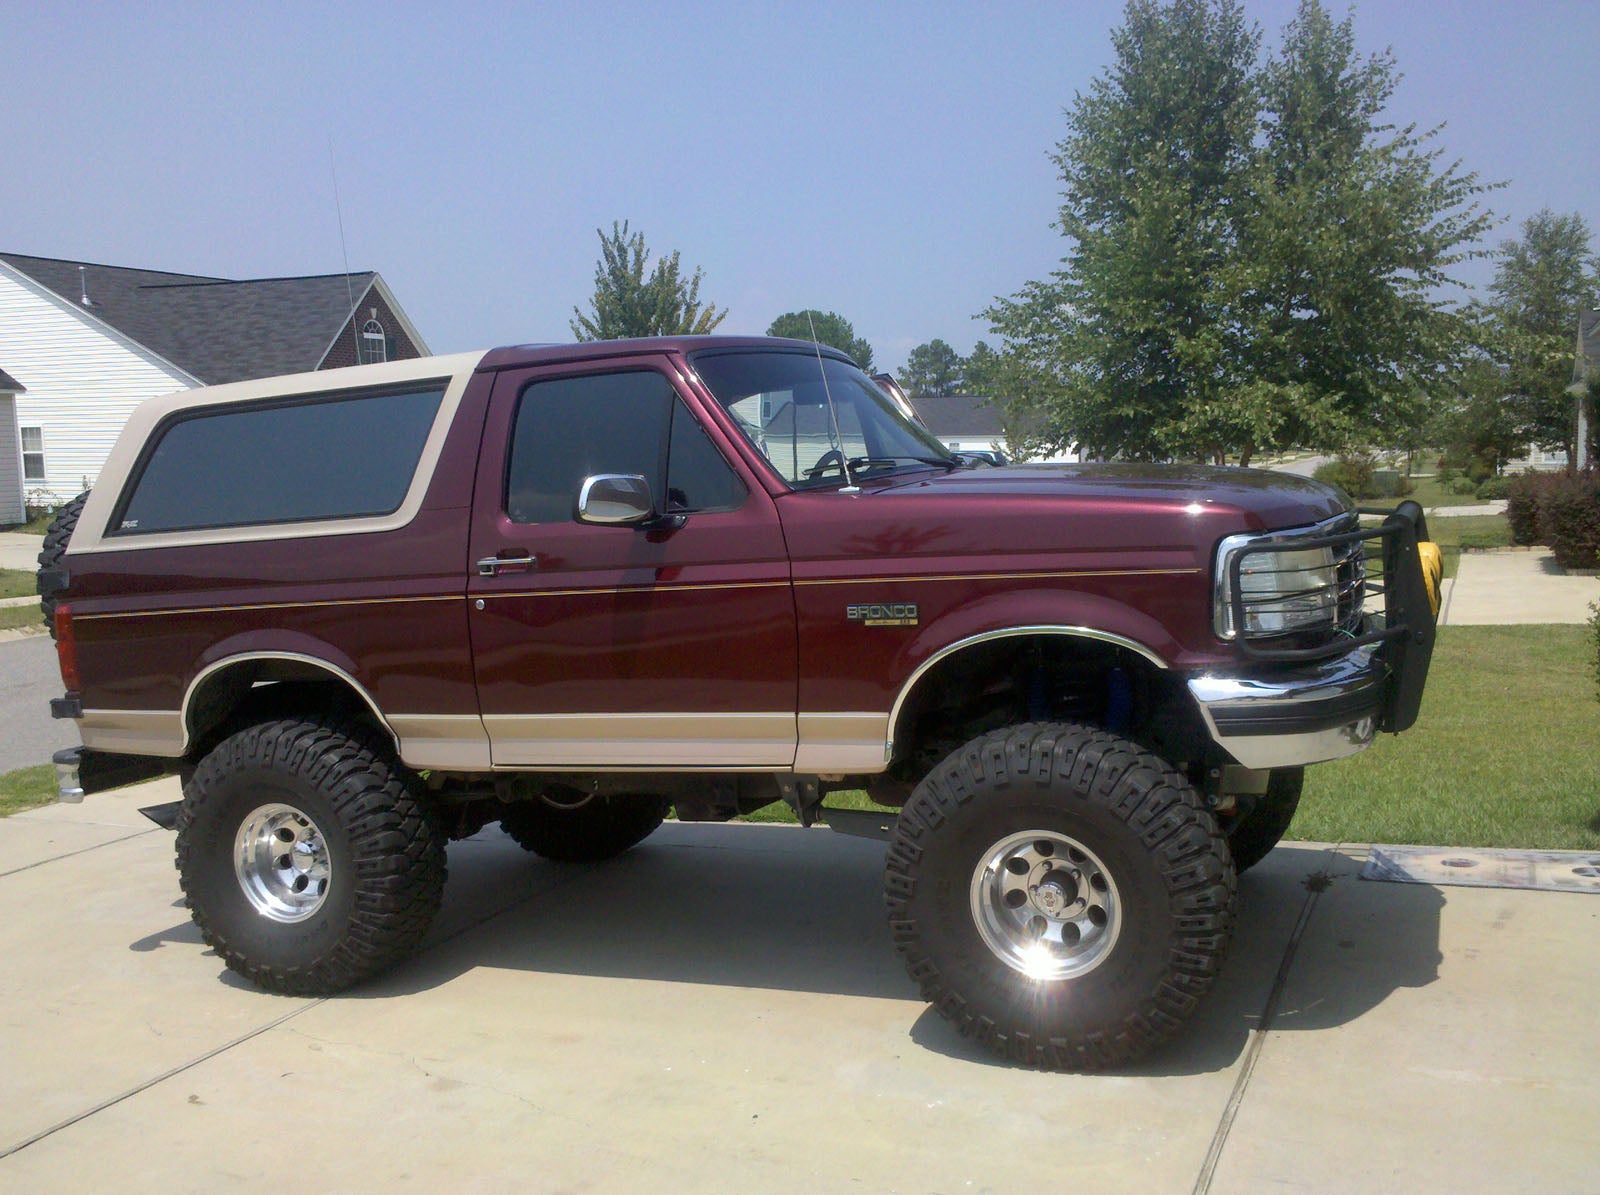 Ford bronco bodies for sale #4